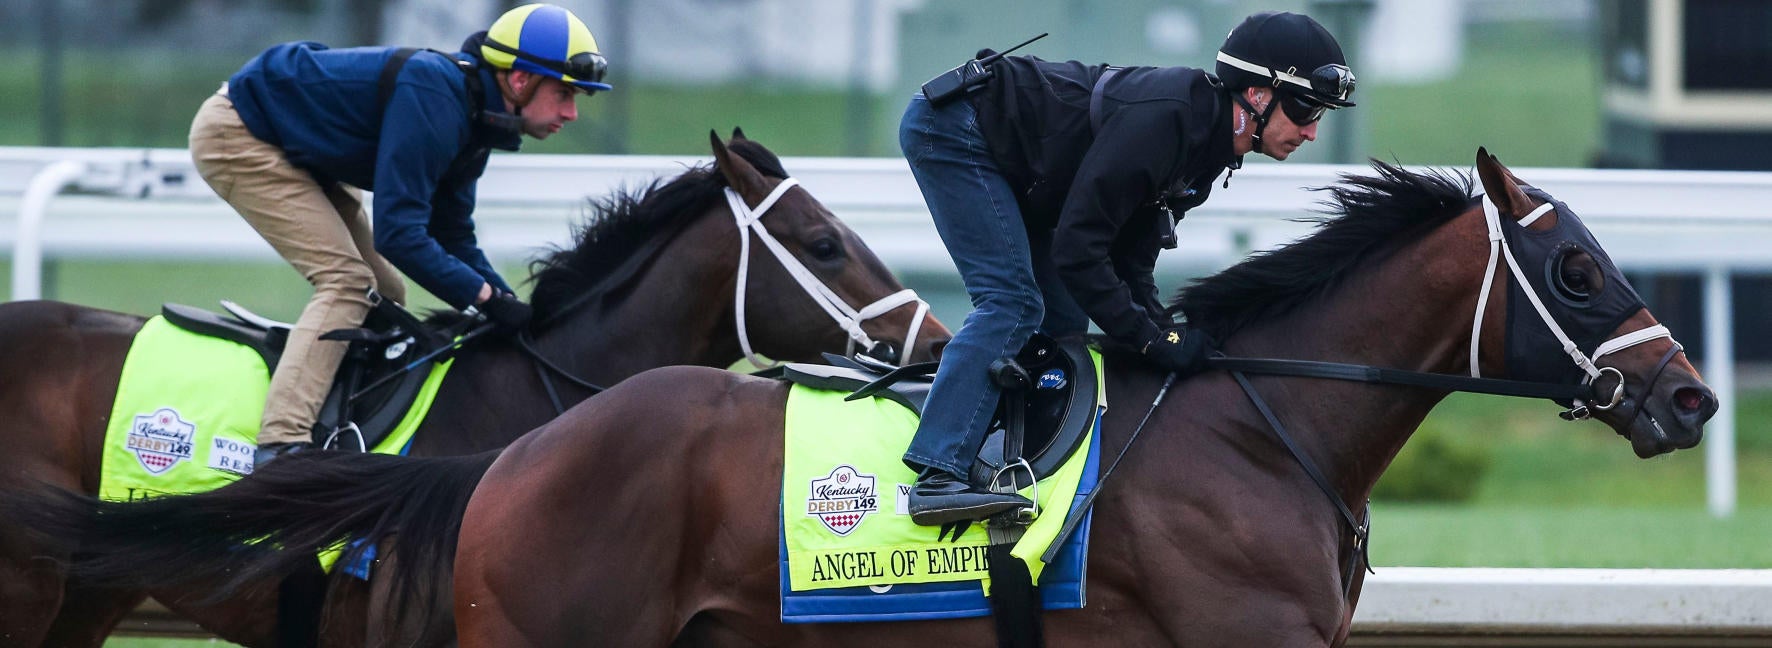 Angel of Empire profile 2023 Kentucky Derby odds, post position